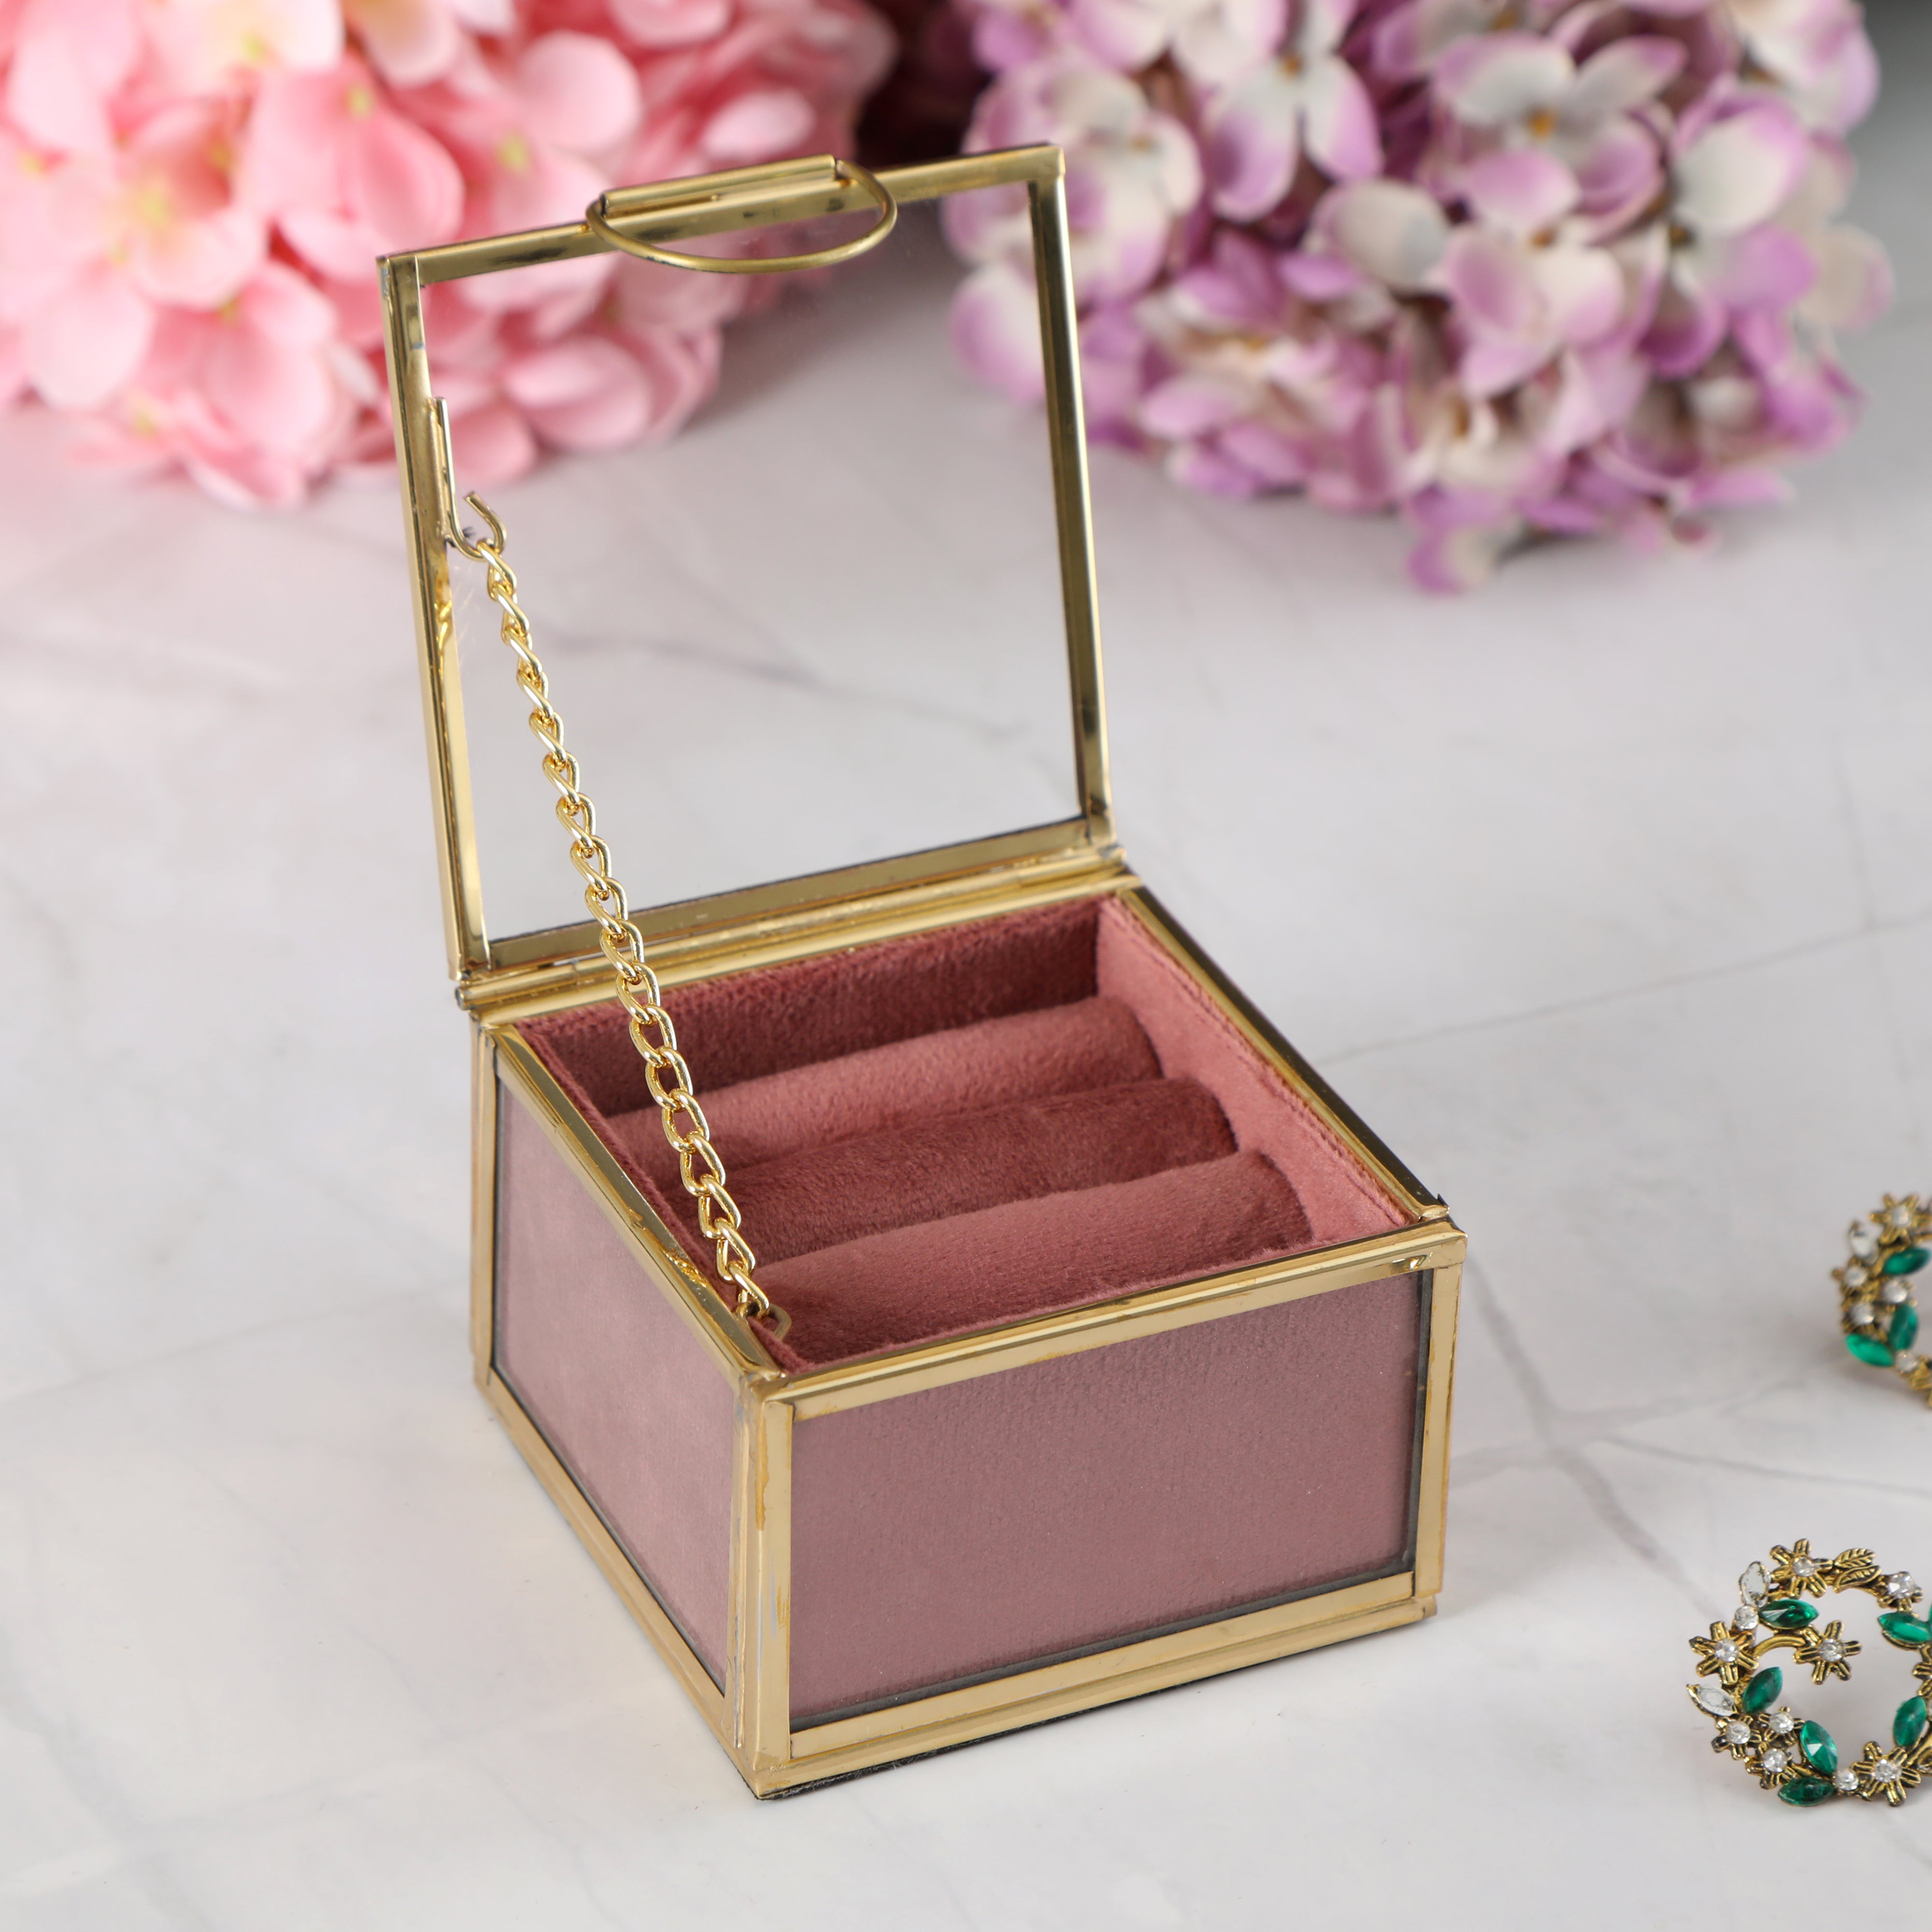 Glass Ring Box - Pink Ring Case 1- The Home Co.